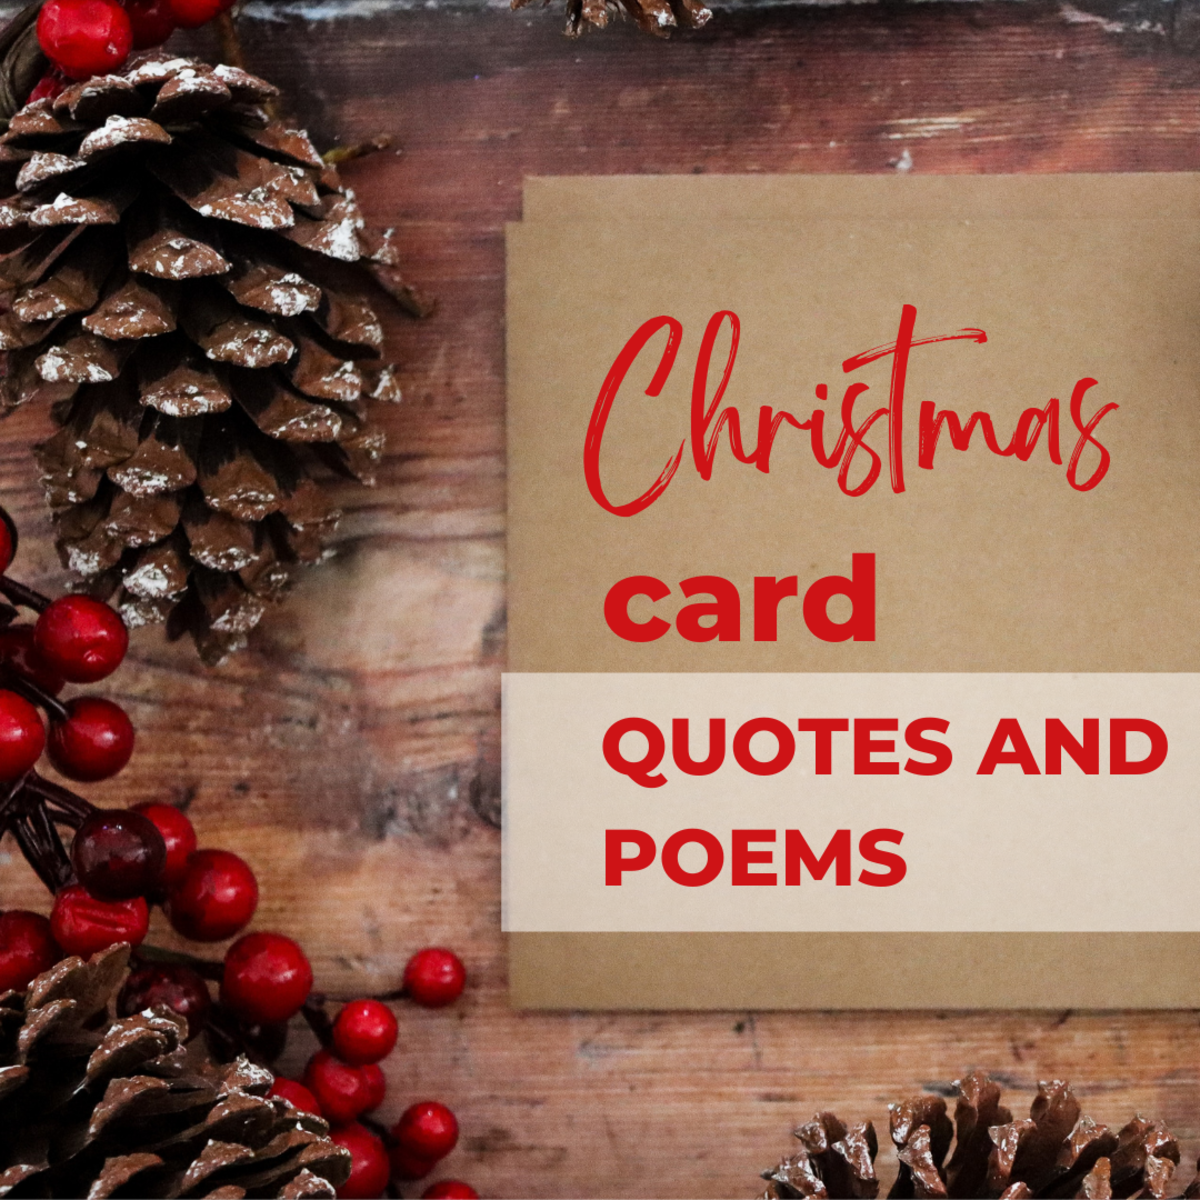 Christmas cards need some spice. Make yours unique with a thoughtful quote or poem!